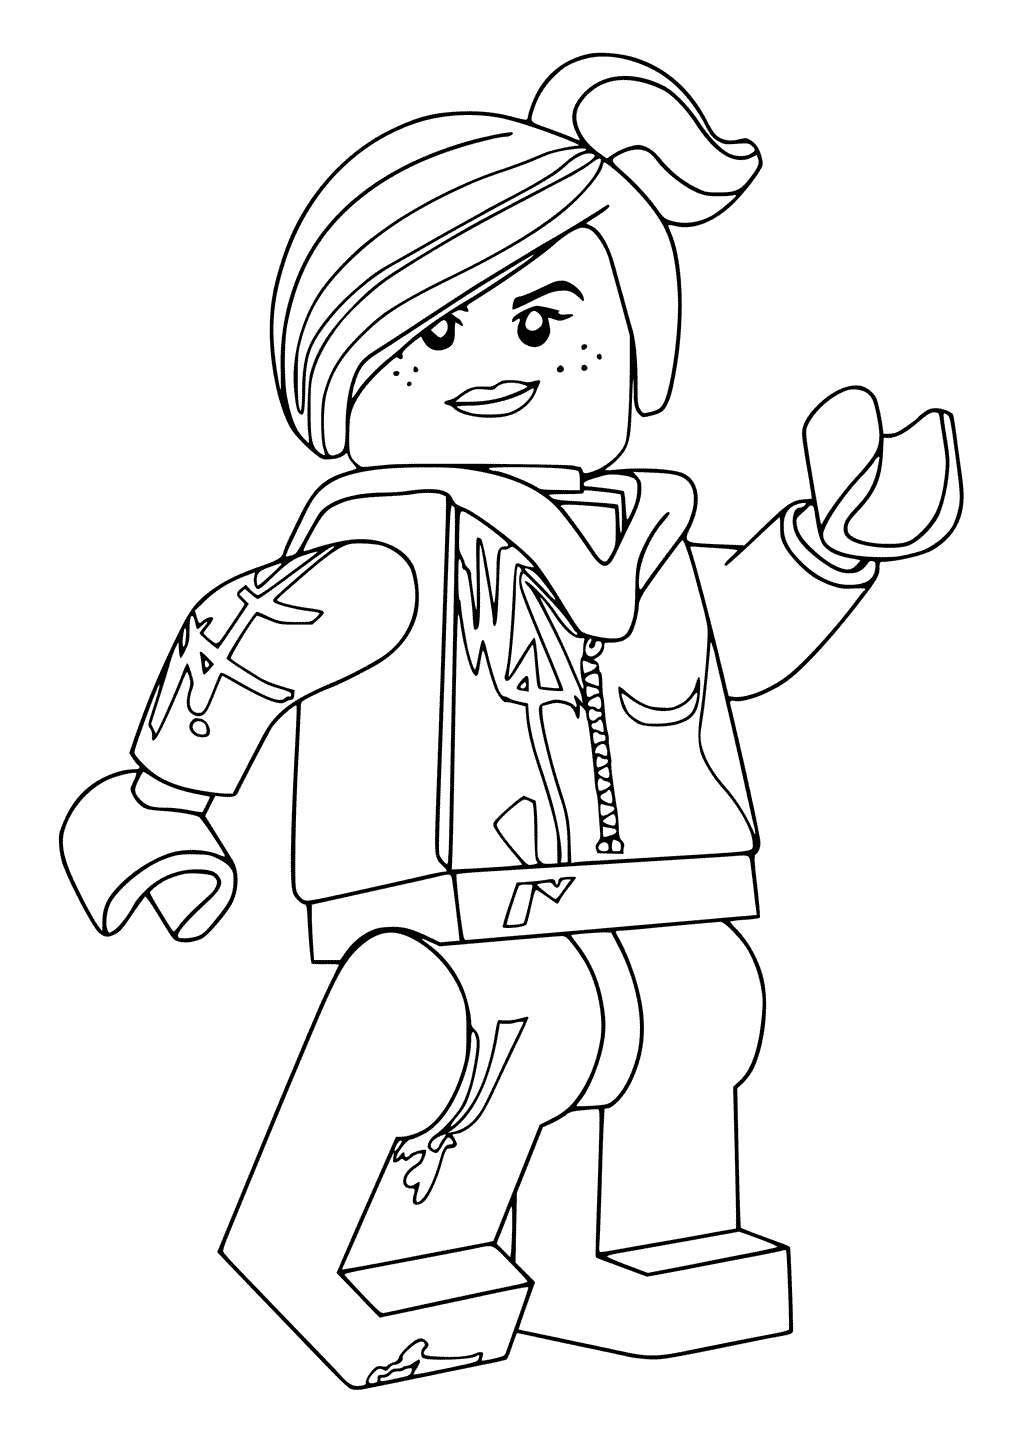 lego movie lord business coloring pages